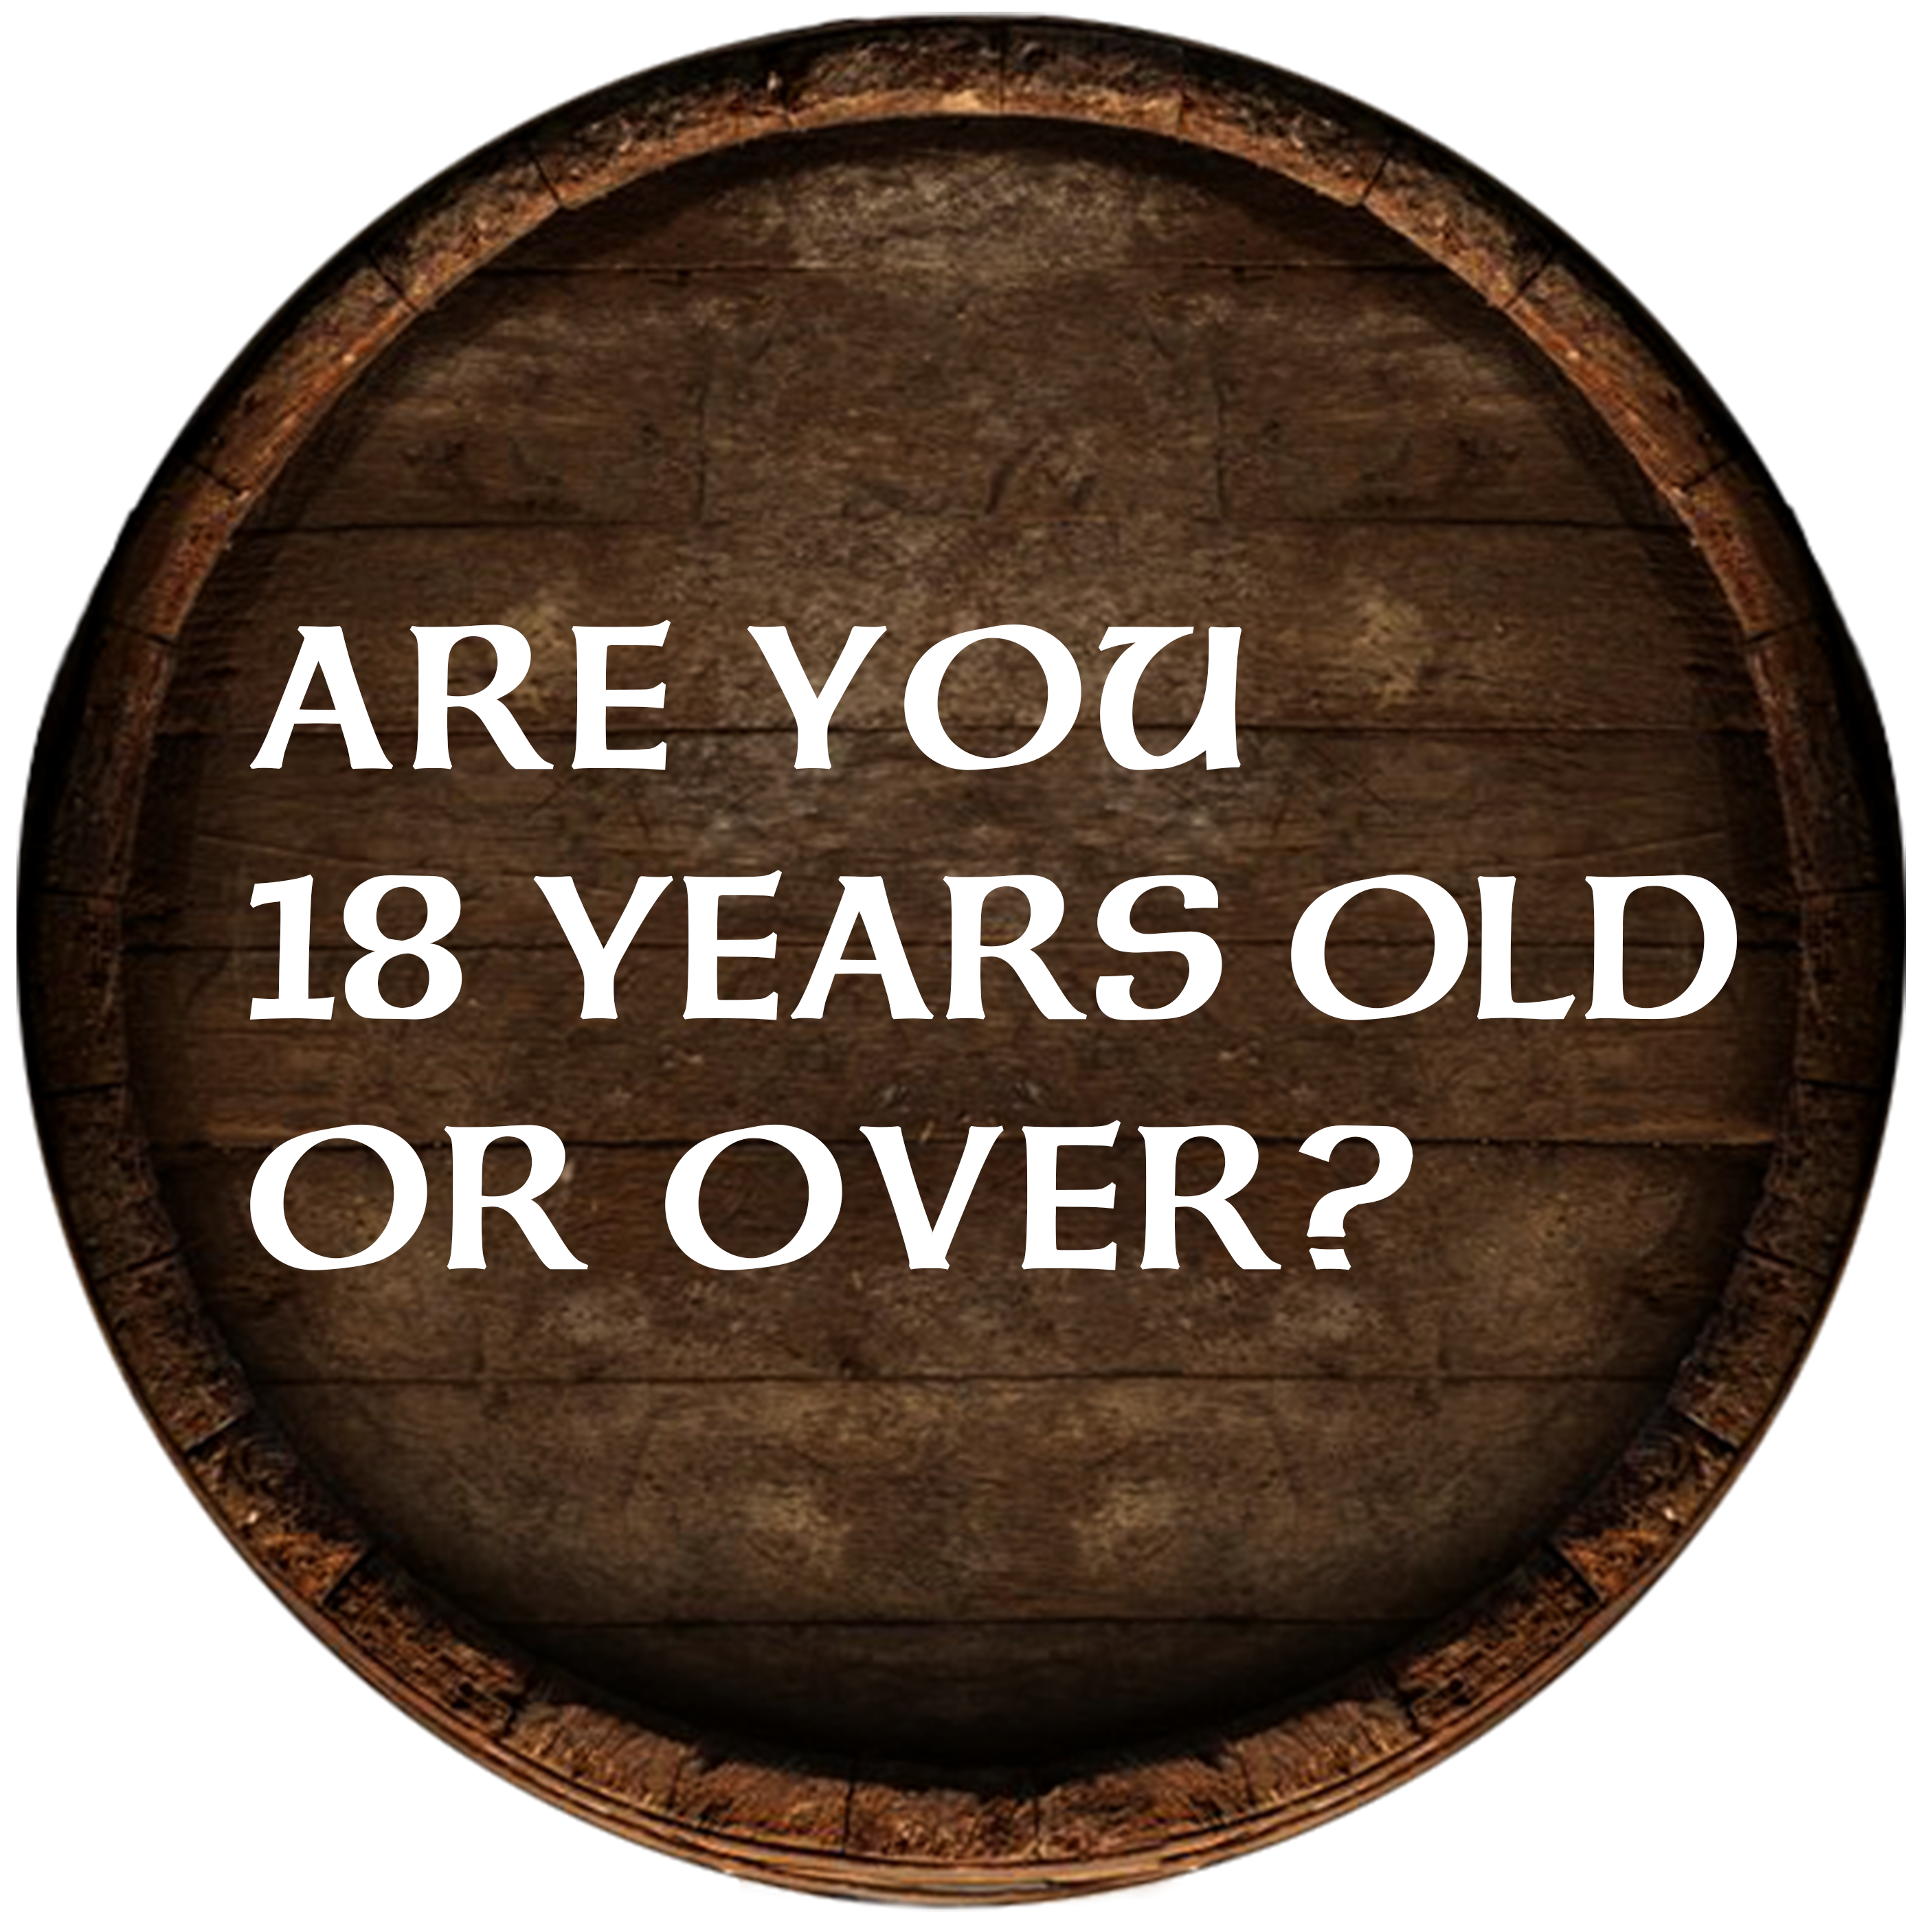 Are you 18 years old or over?